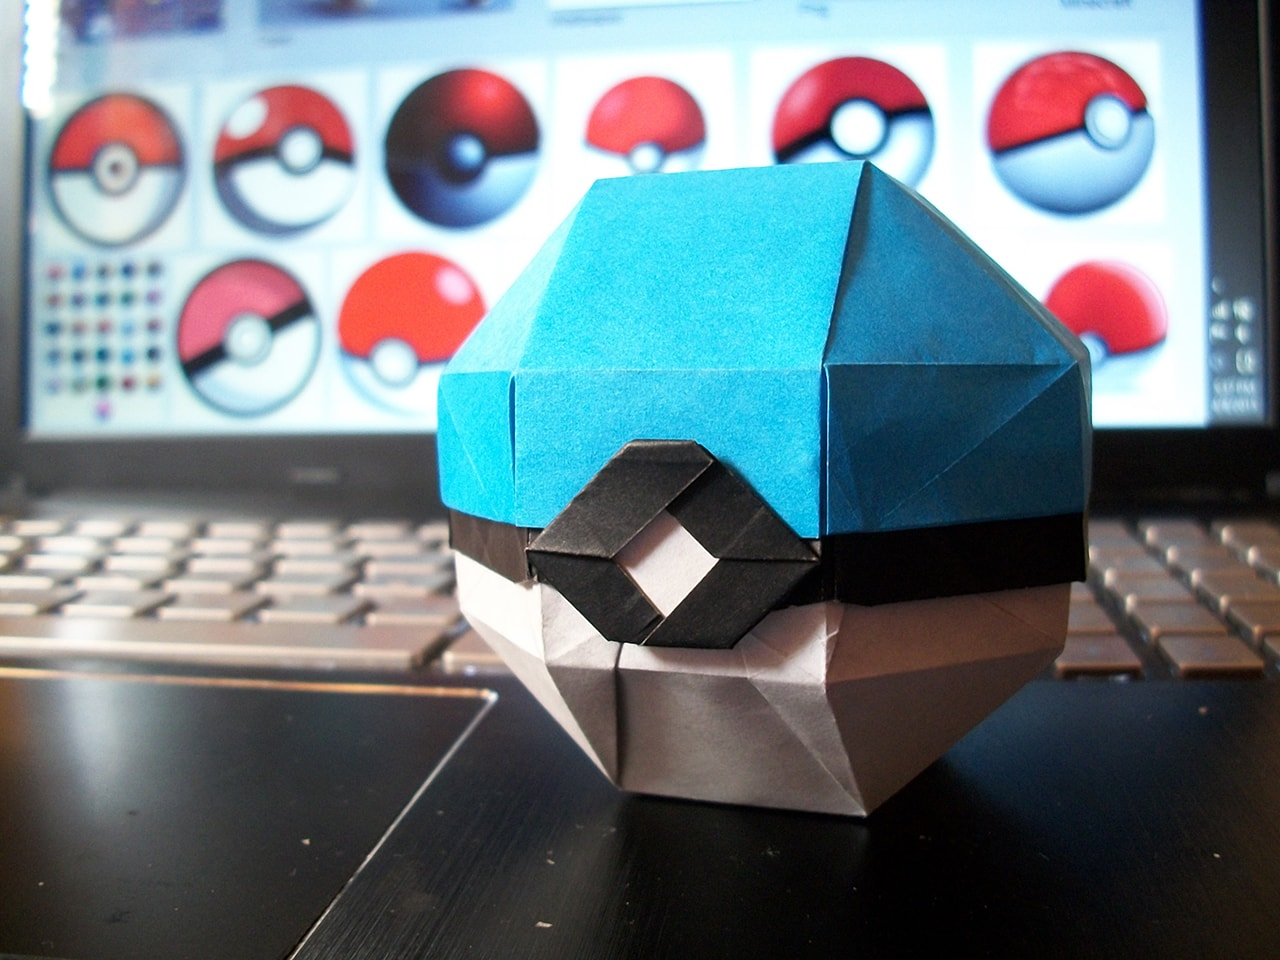 How To Make A Origami Pokeball That Opens Pokemon Origami From The Best Generation Part 1